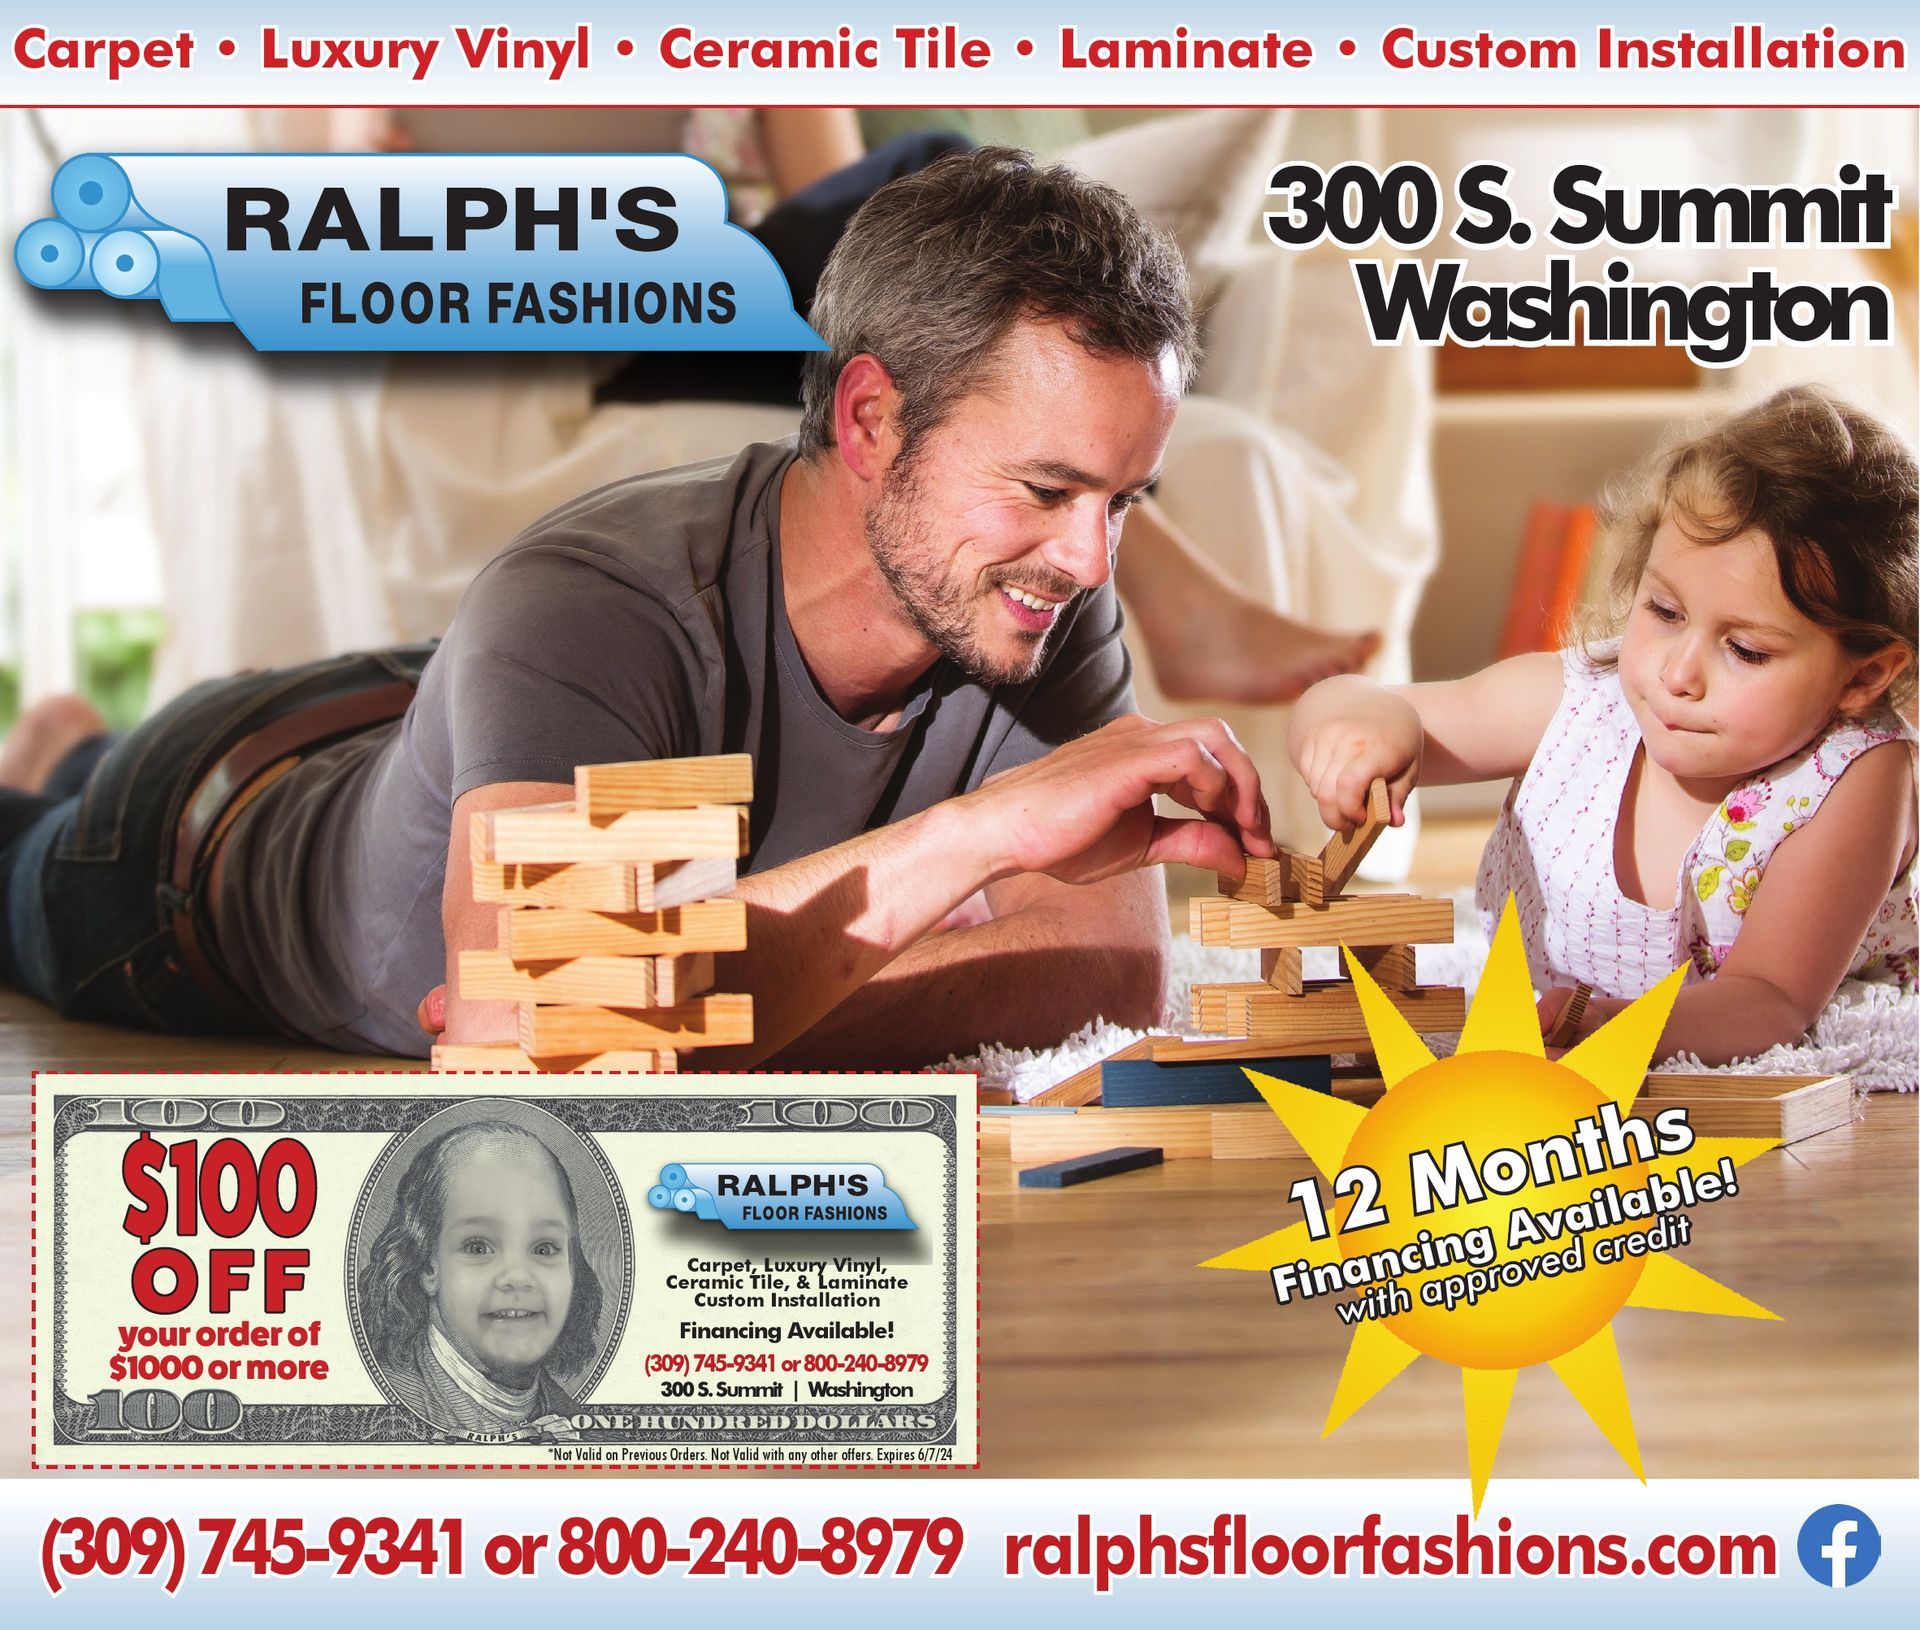 Ralph's Floor Fashions $100 off coupon for carpet, LVT-luxury vinyl, ceramic tile, laminate and installation and more coupon! Washington, IL serving the tri-county. Peoria, IL